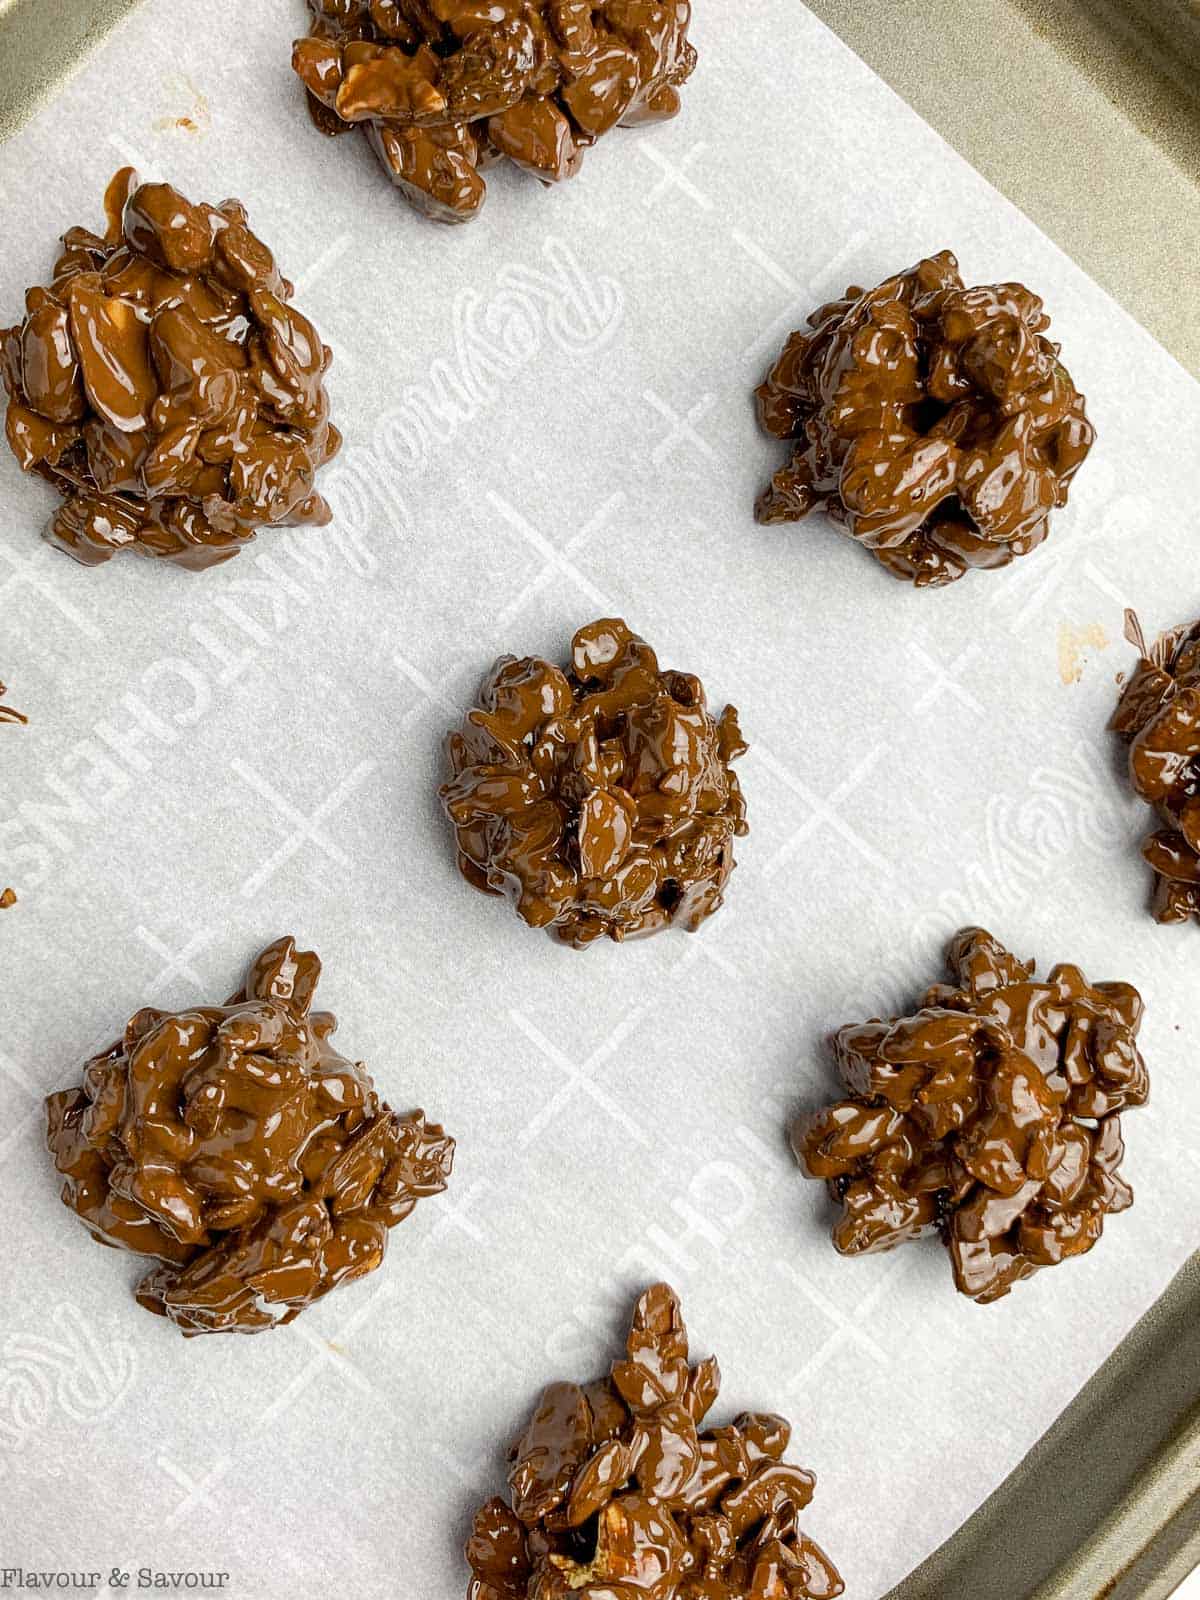 Chocolate nut clusters on a baking sheet.